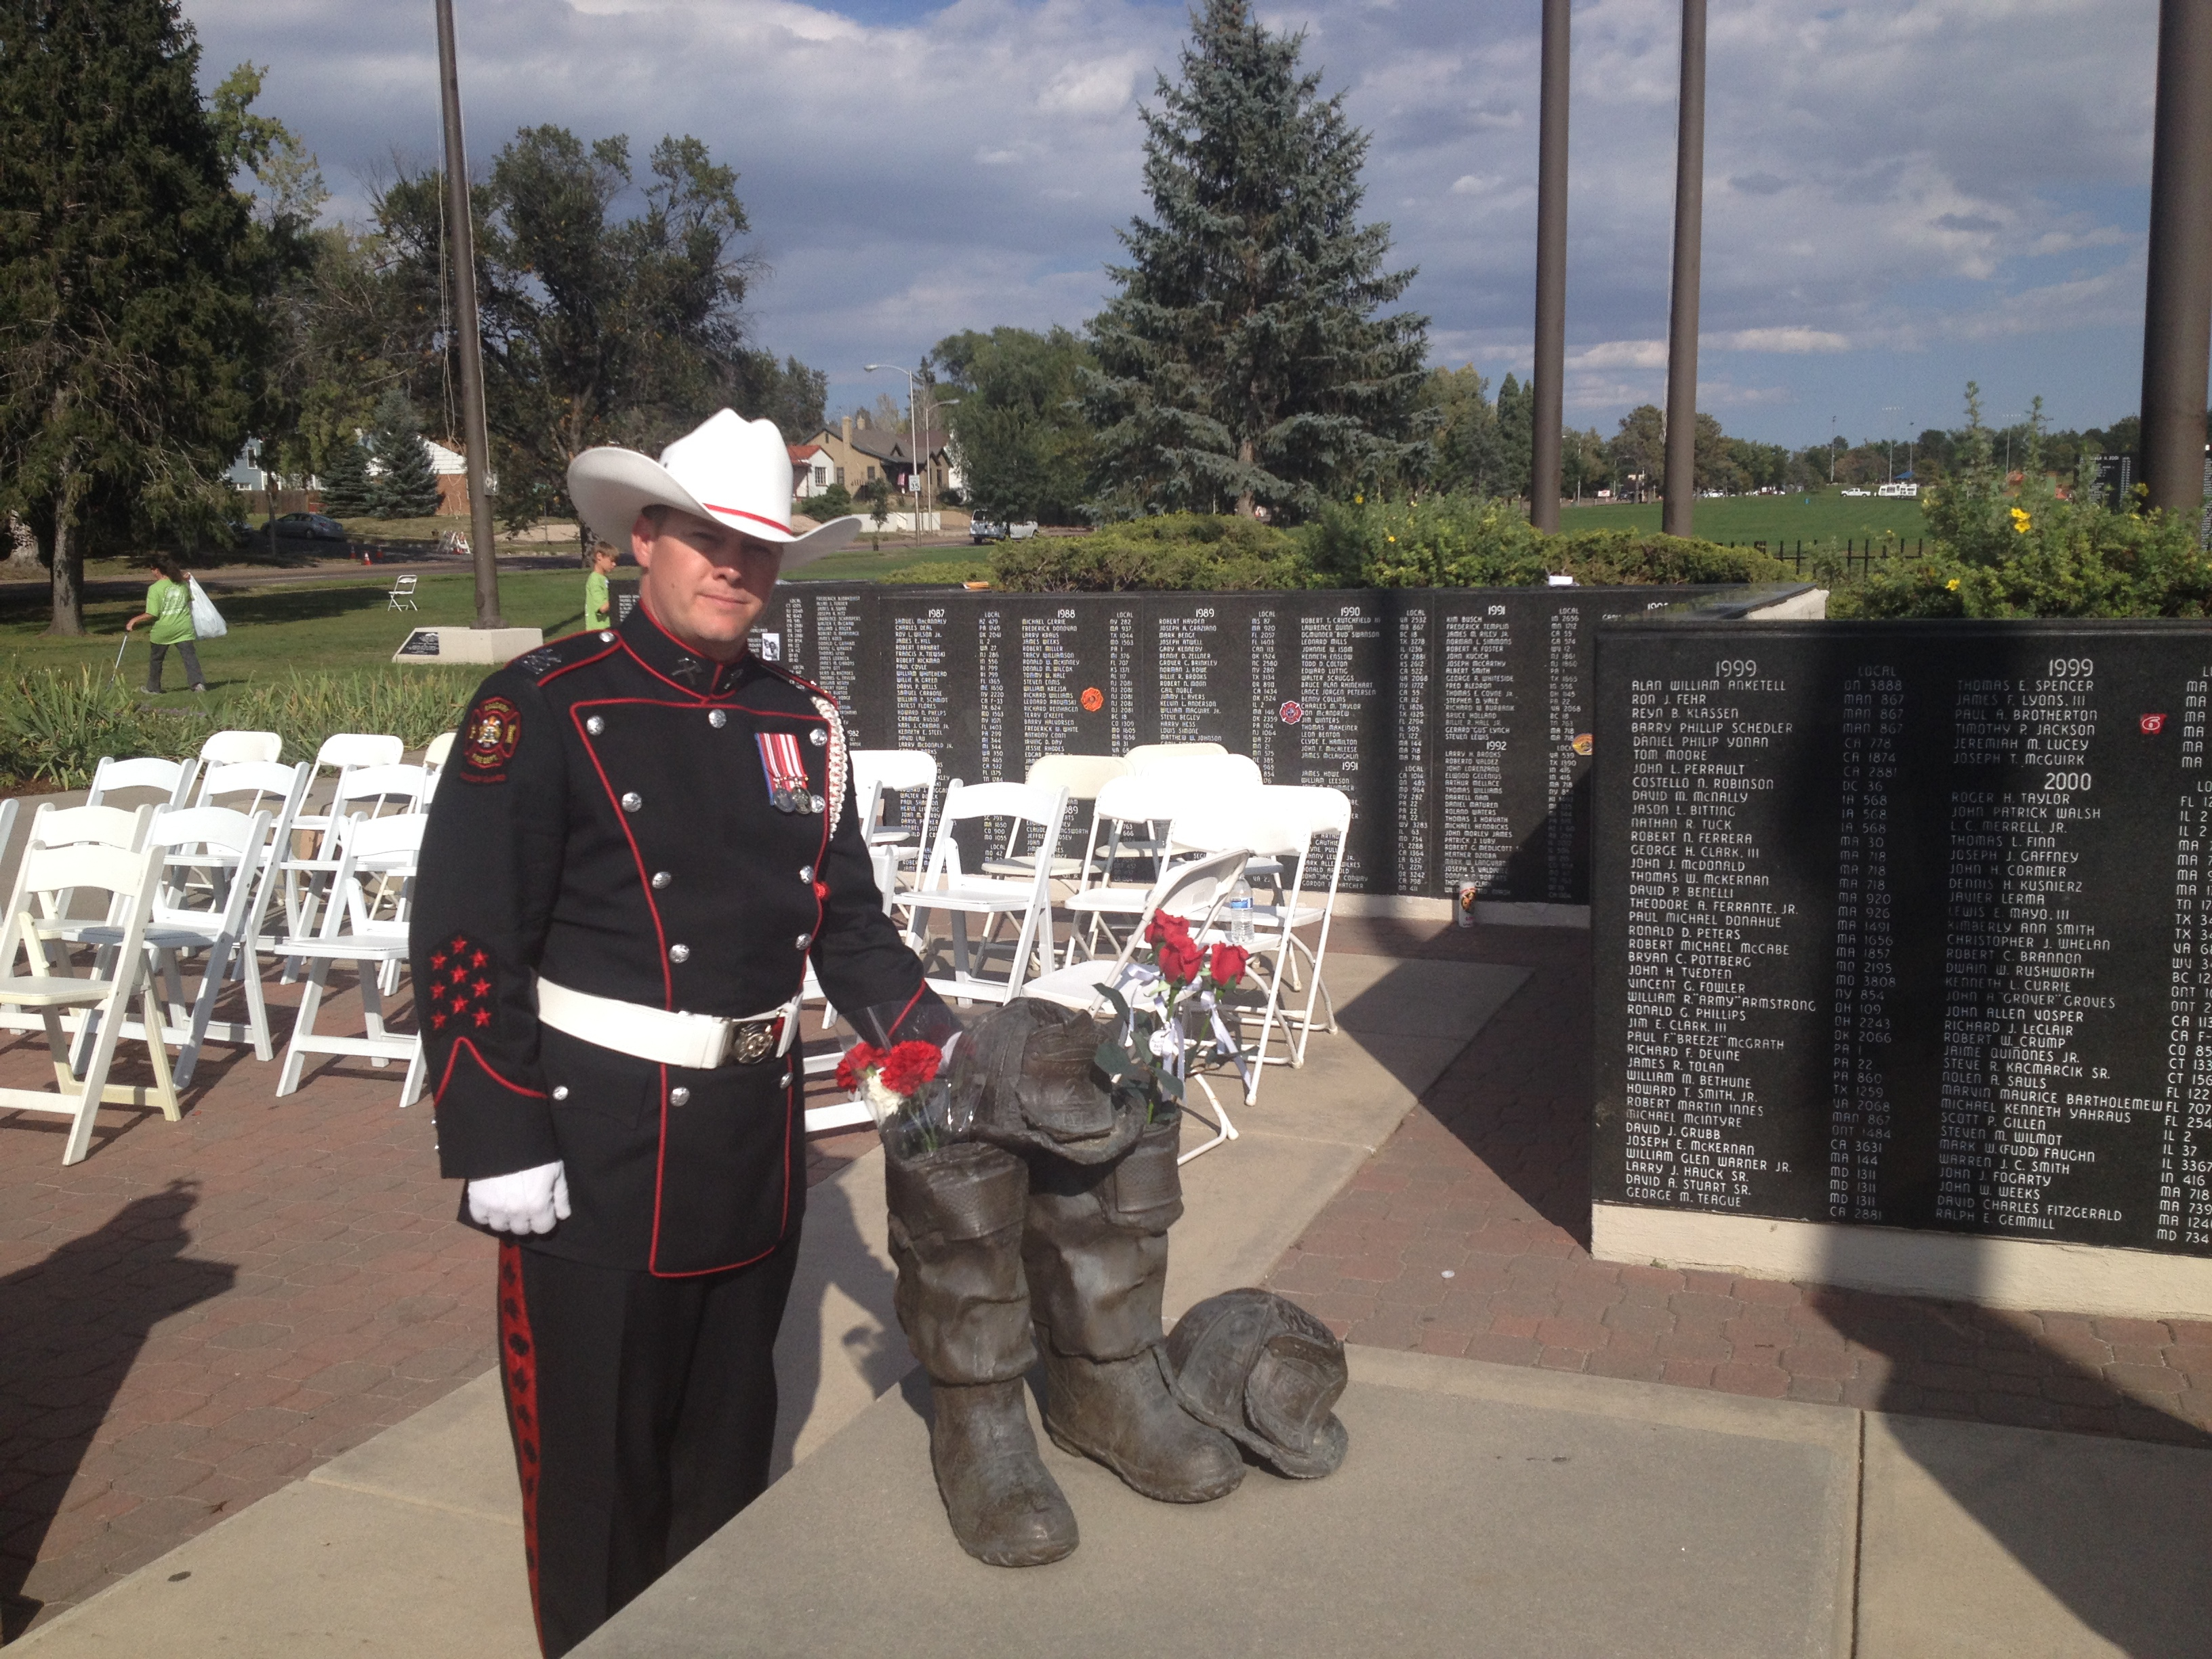 A CFD Honour Guard in unifrom with white belt, gloves and cowboy hat stands with a sculpture of boots, in front of a memorial wall inscribed with names.